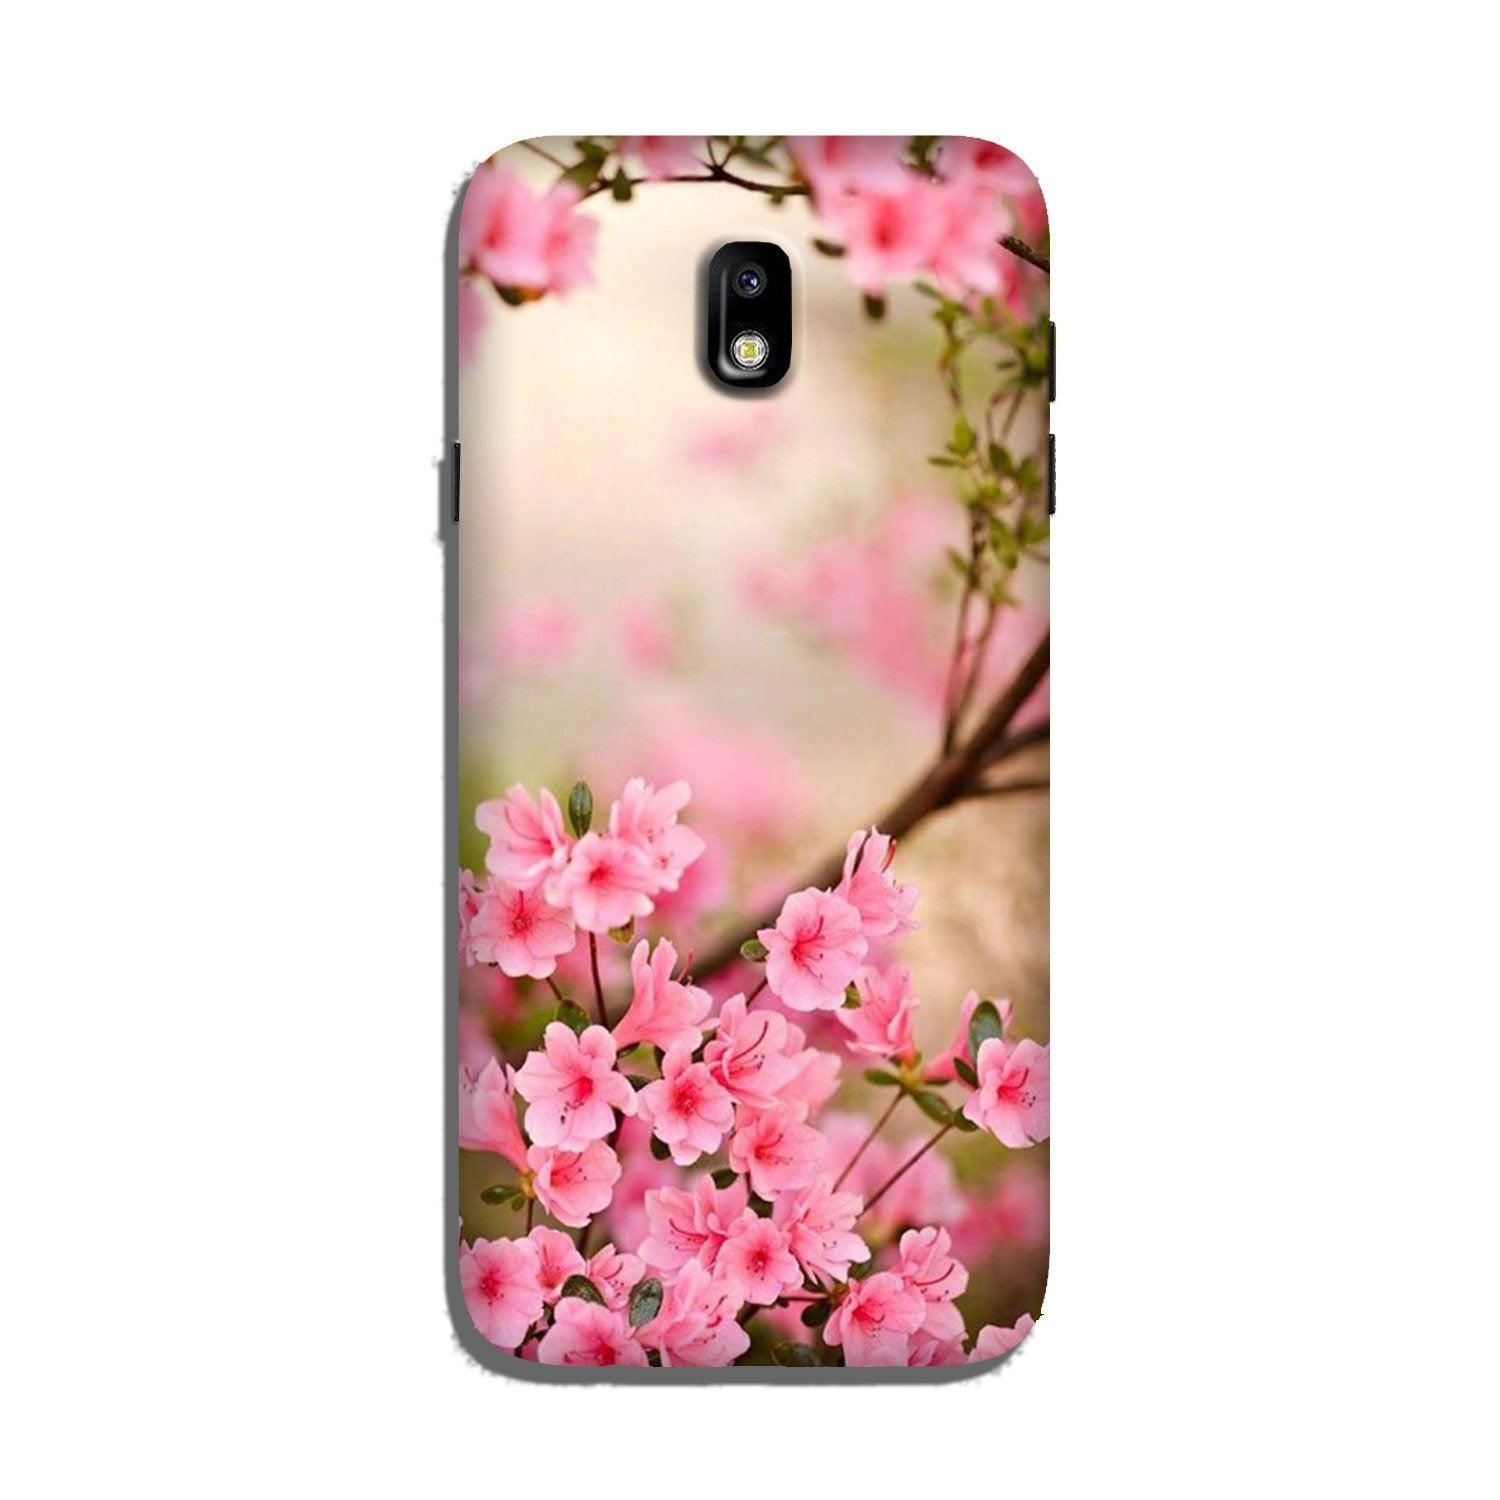 Pink flowers Case for Galaxy J7 Pro